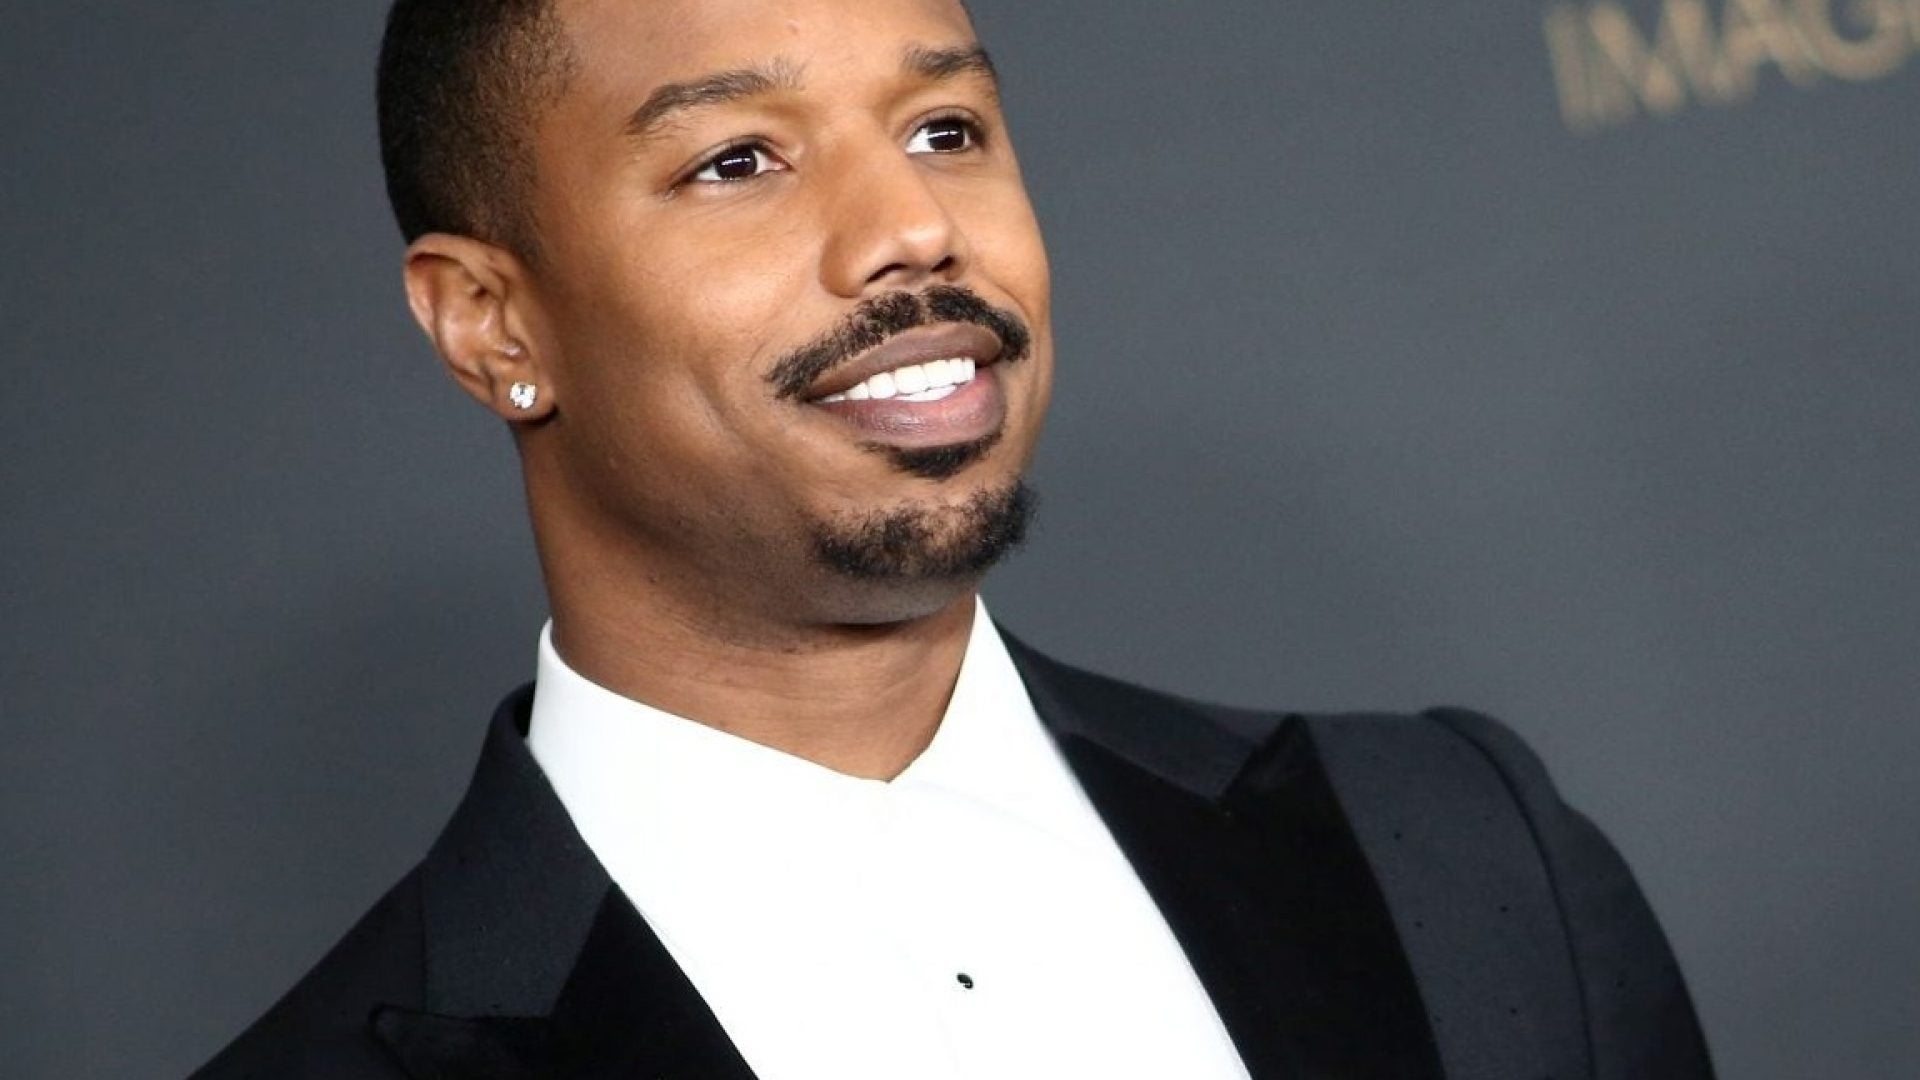 Michael B. Jordan Just Answered Our Prayers and Shared A Sexy Thirst Trap To Encourage Voting